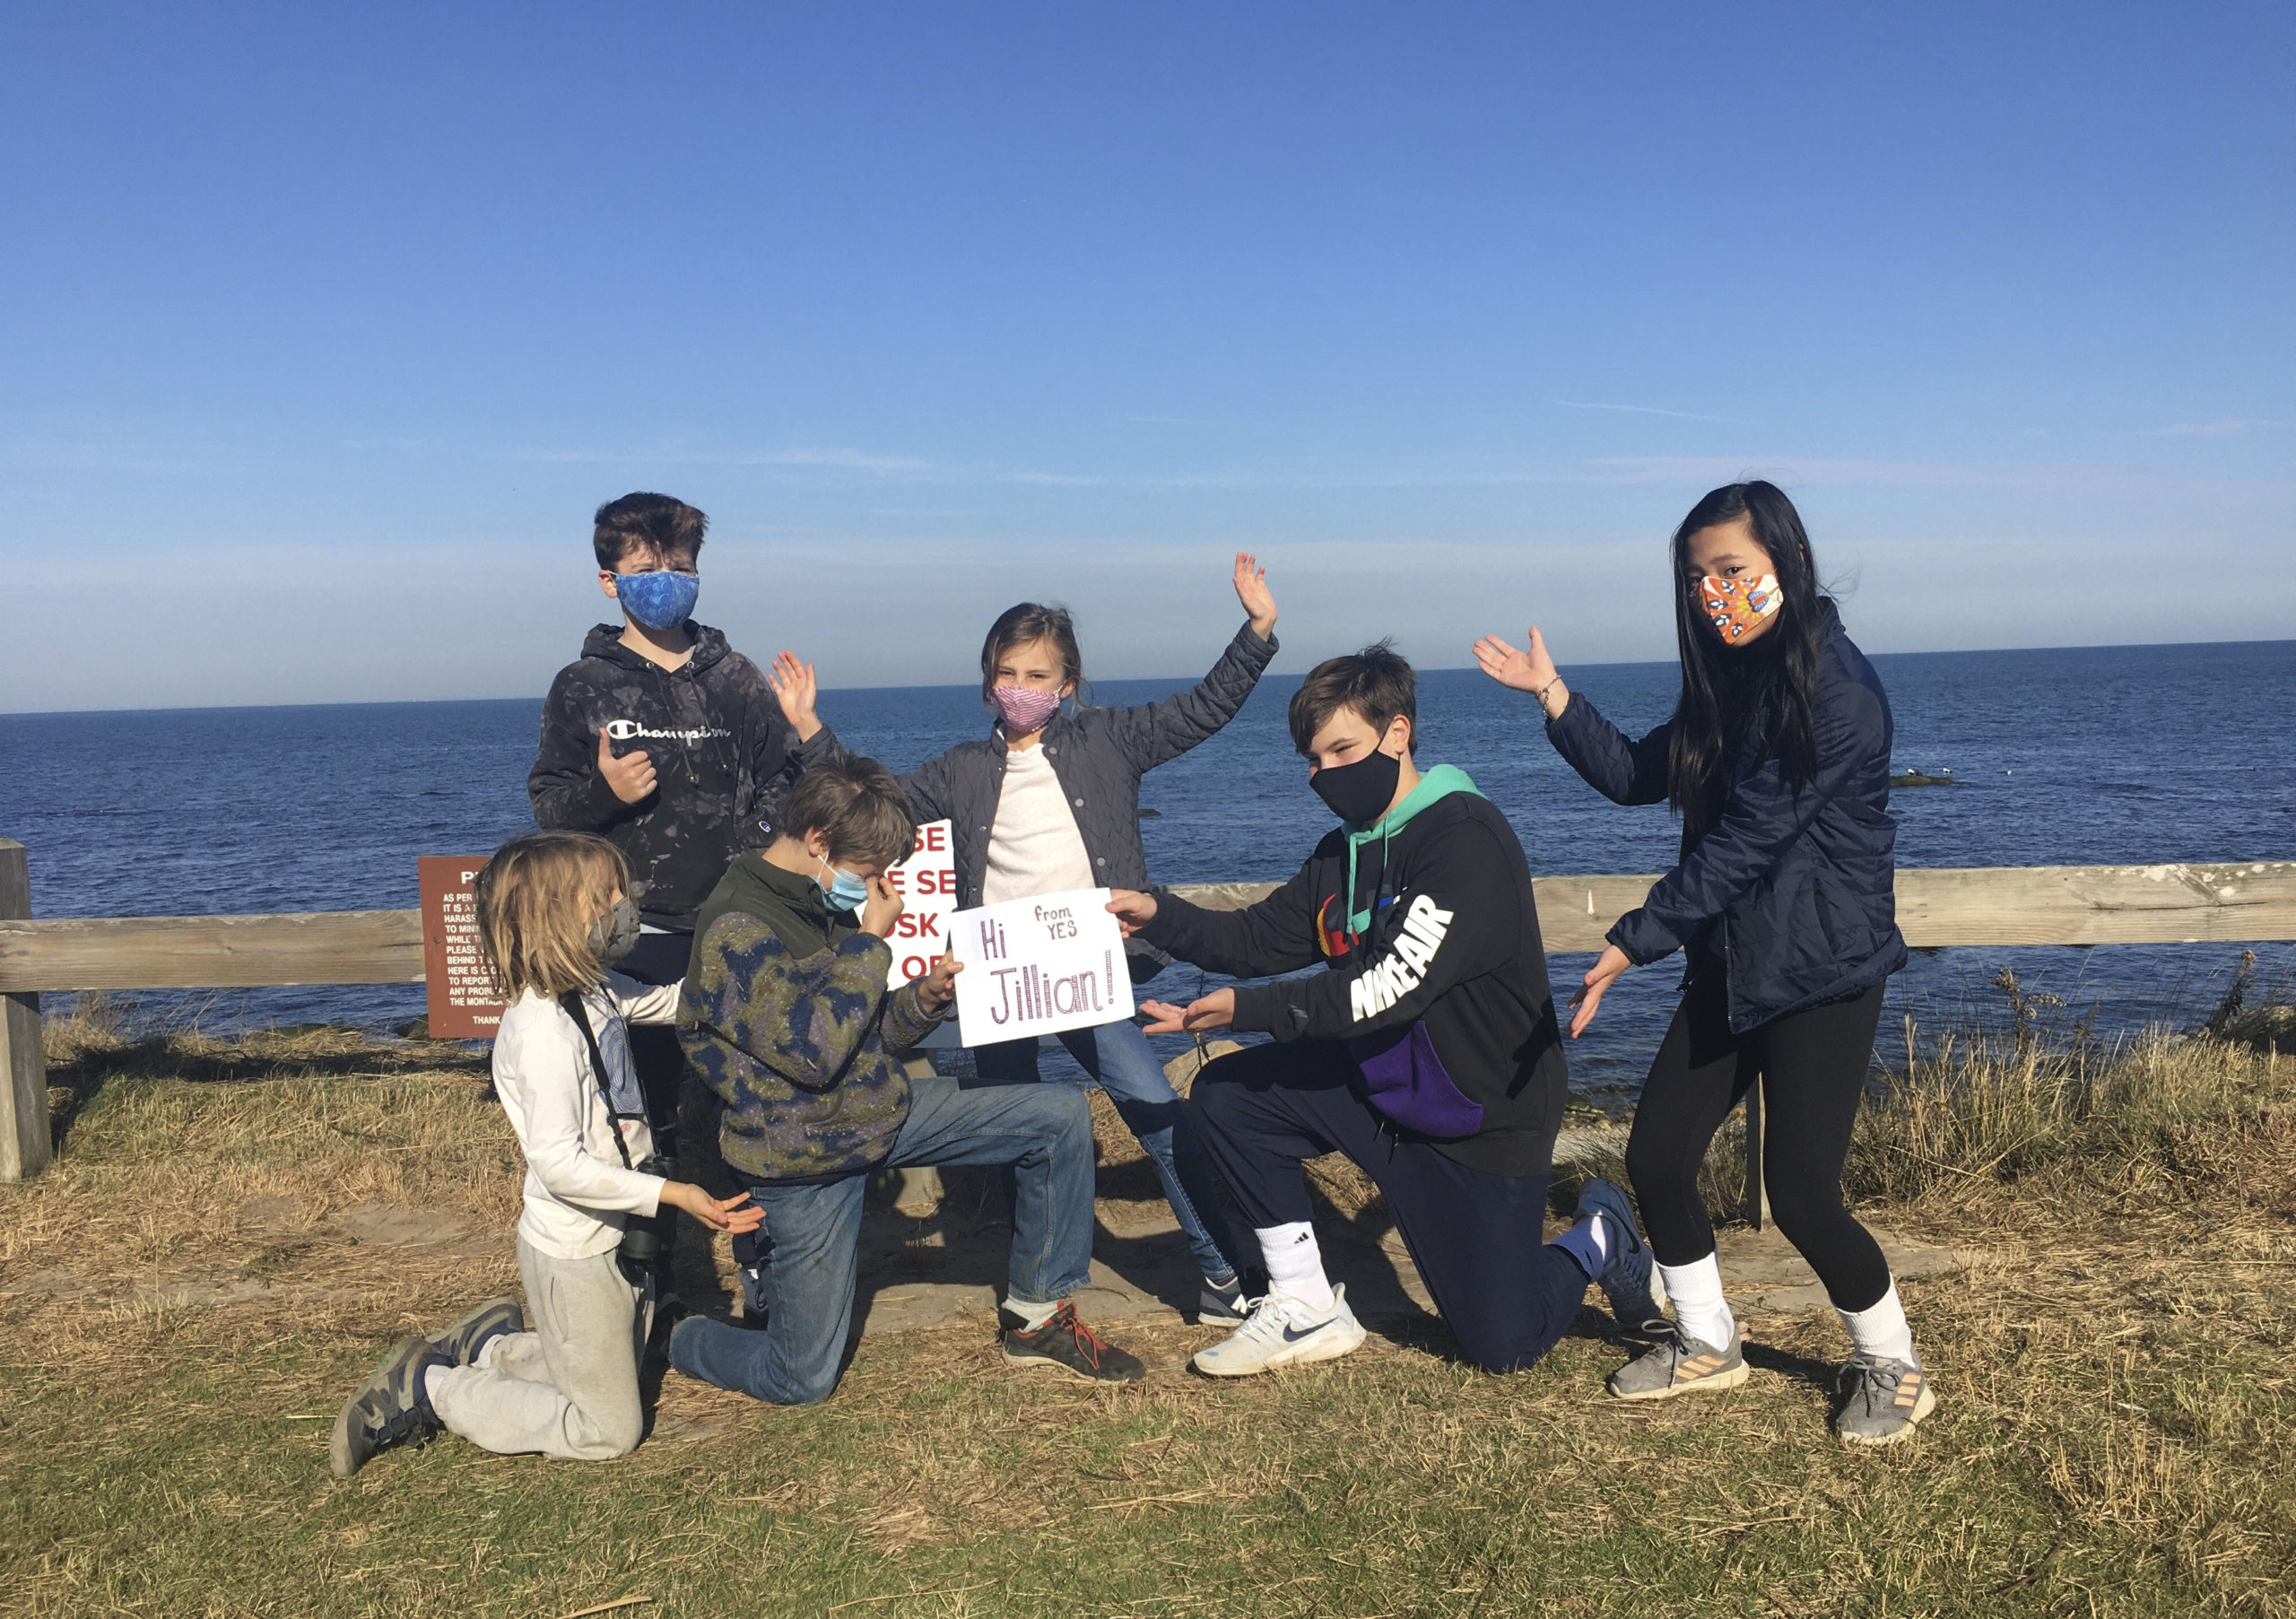 The group went on a birding tour in Montauk, and had a special message for a member who lives out in California but has been part of the activities and meetings remotely.